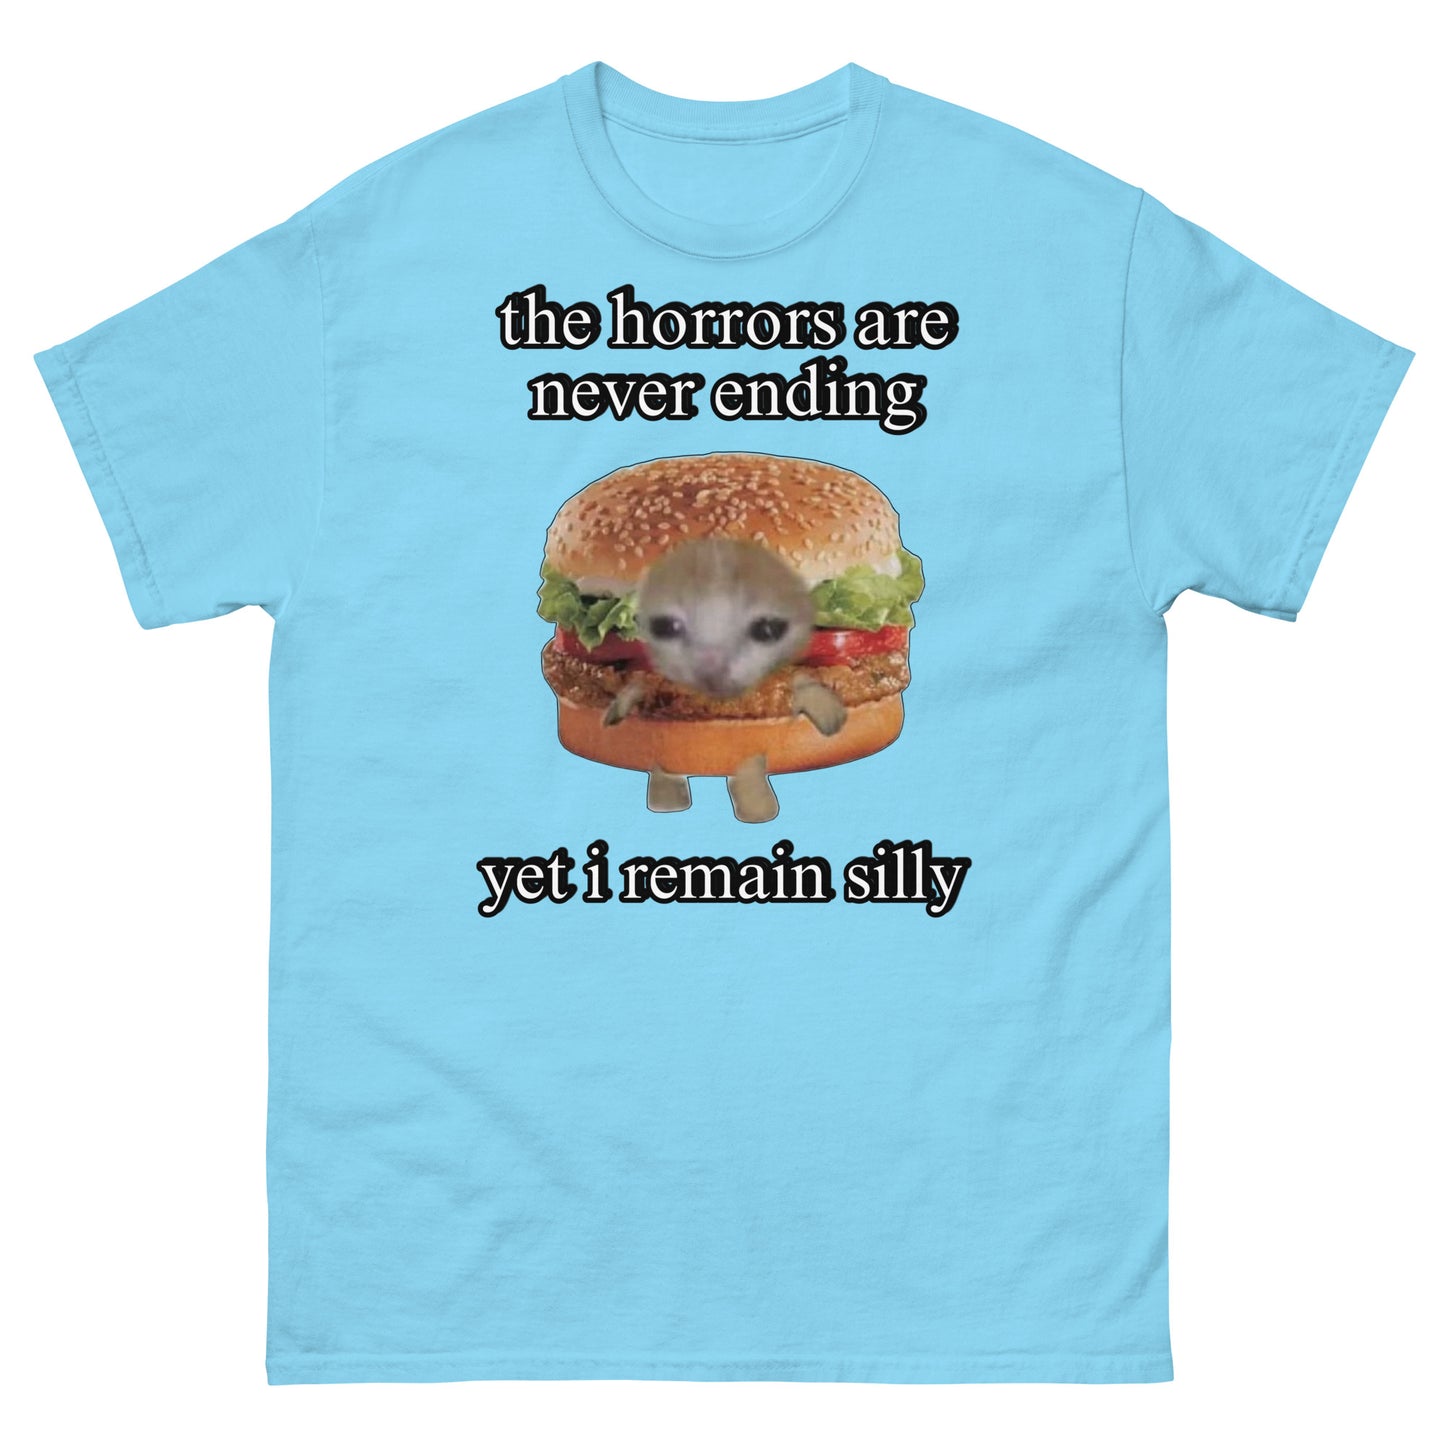 The horrors are never ending Cringey Tee